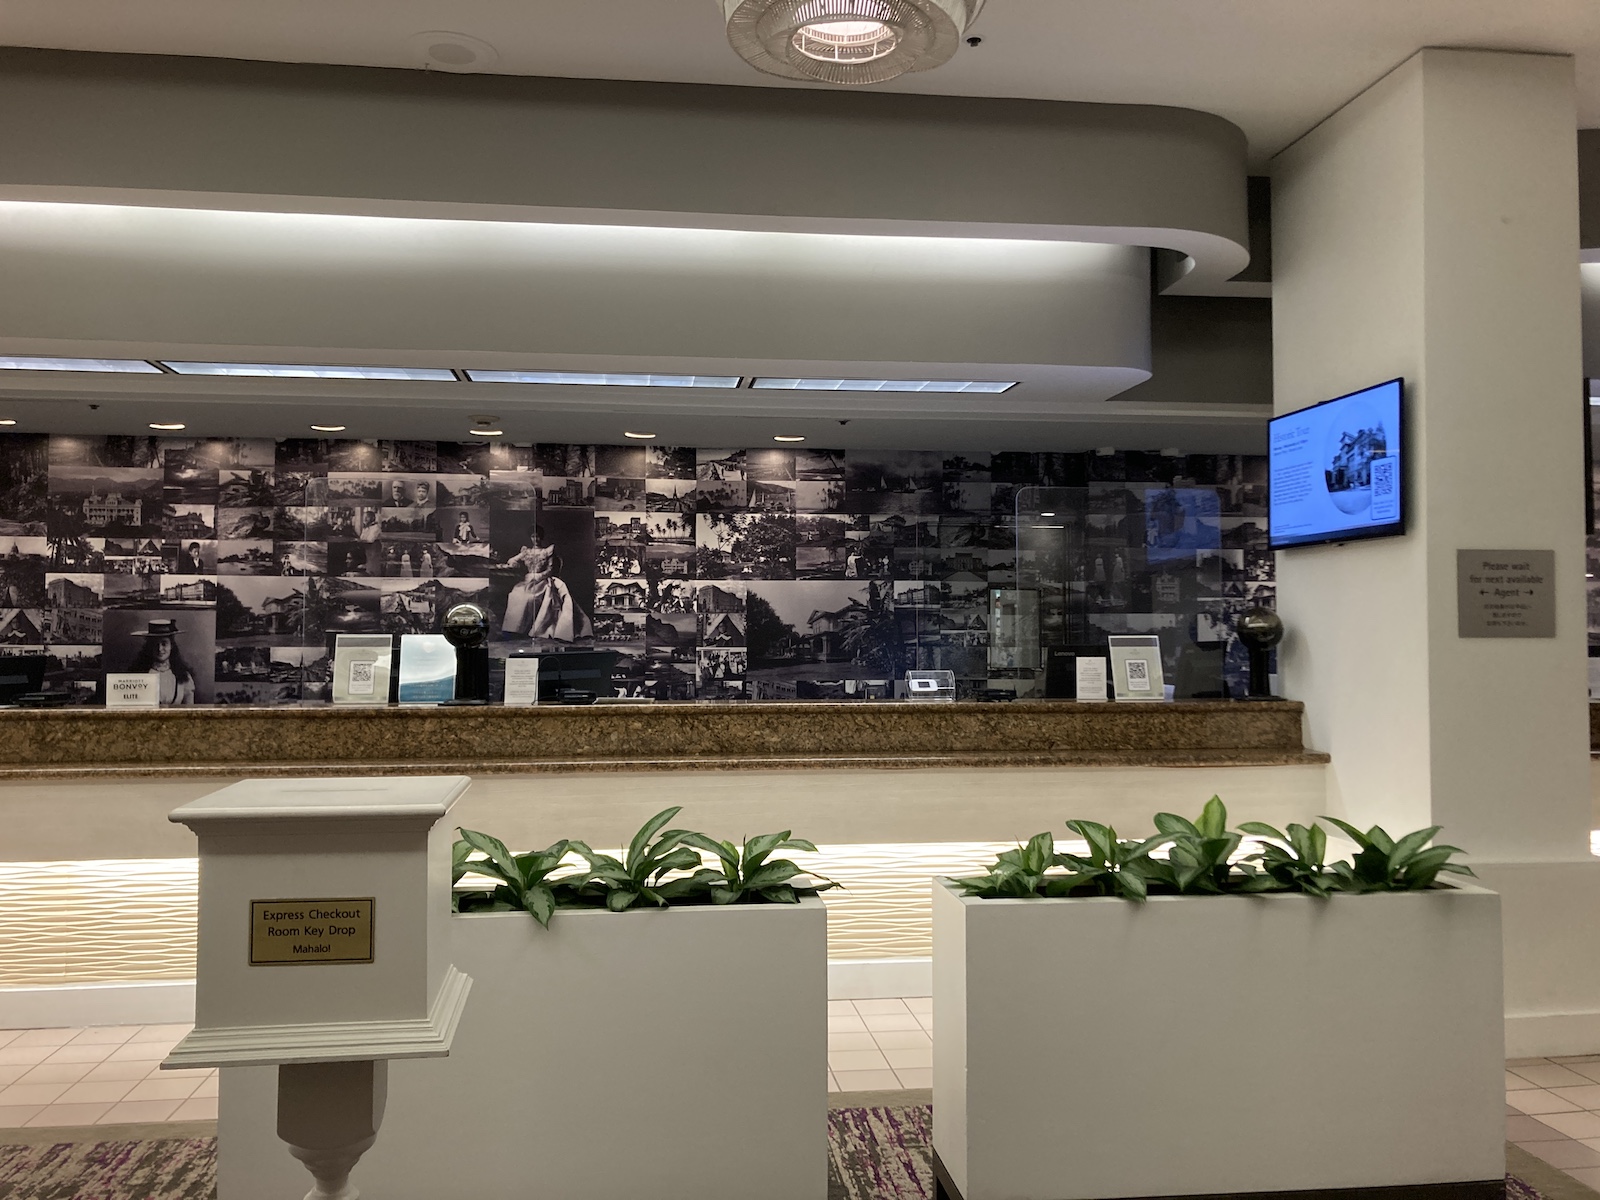 Image of the reception desk with pictures of the princess on the wall